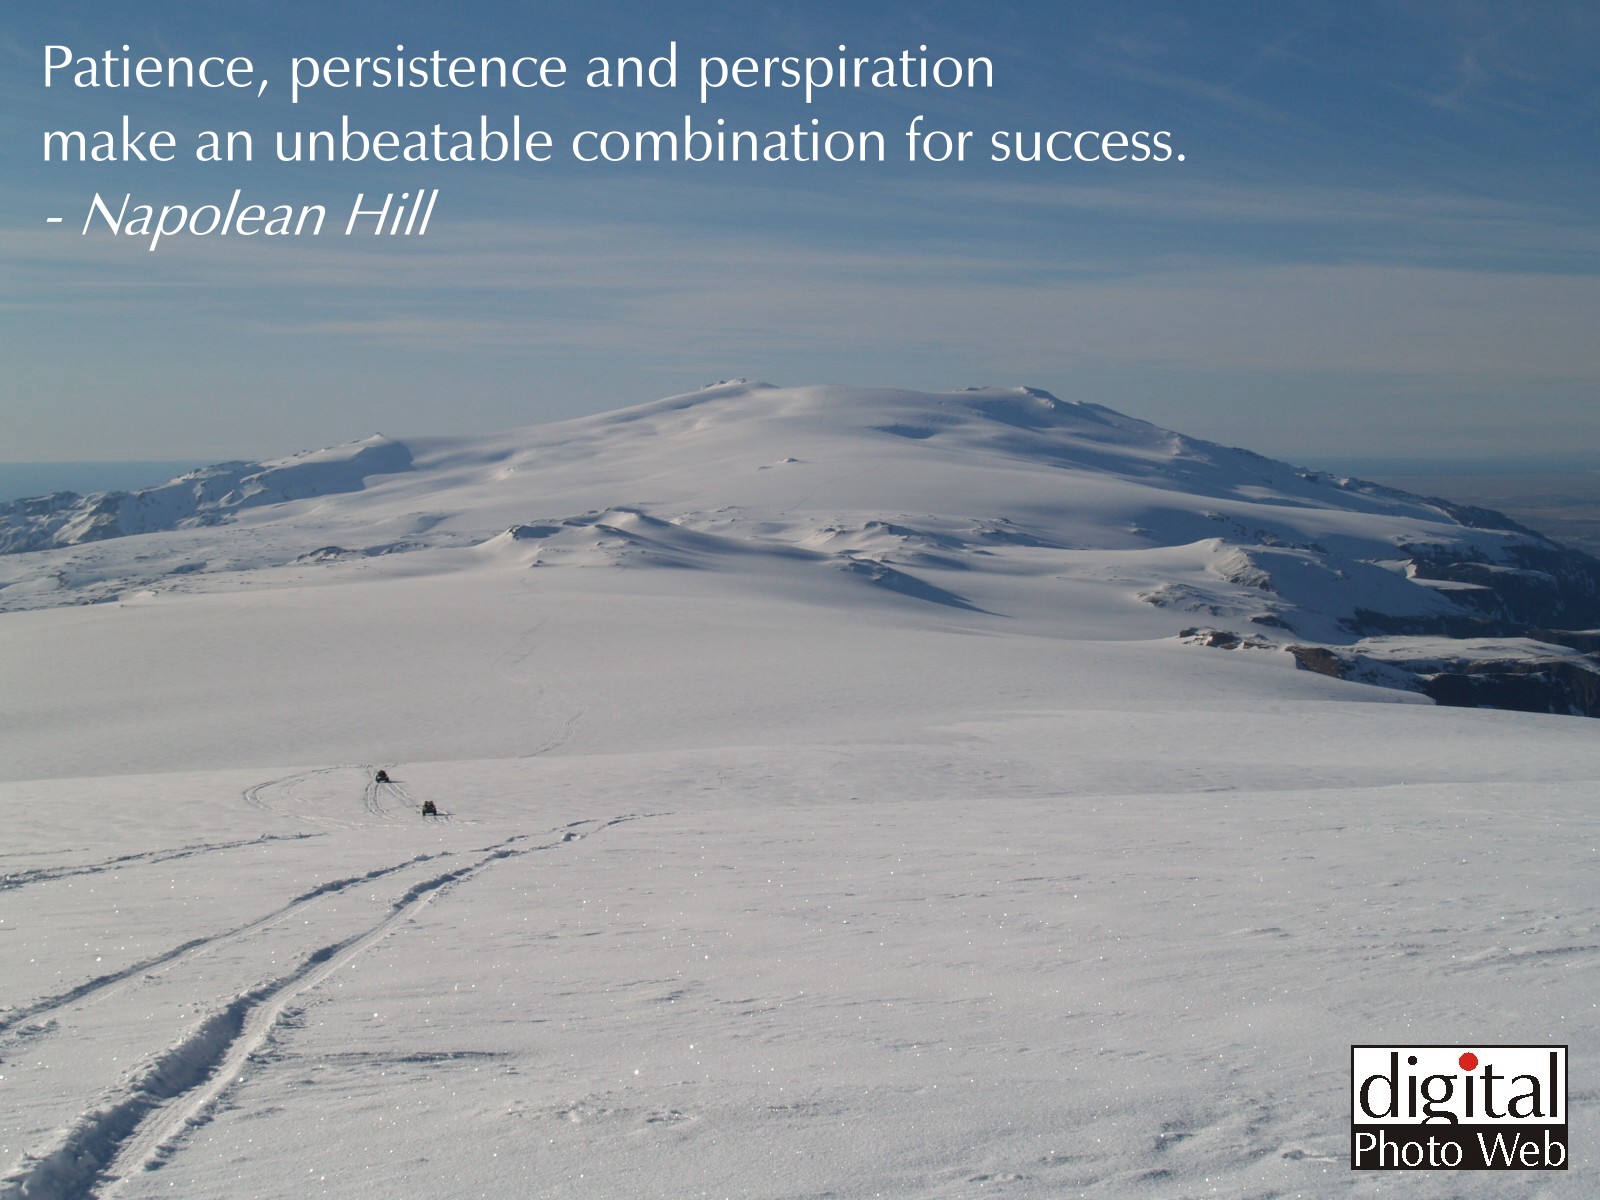 Motivational Wallpaper On Success - Napoleon Hill Quotes , HD Wallpaper & Backgrounds